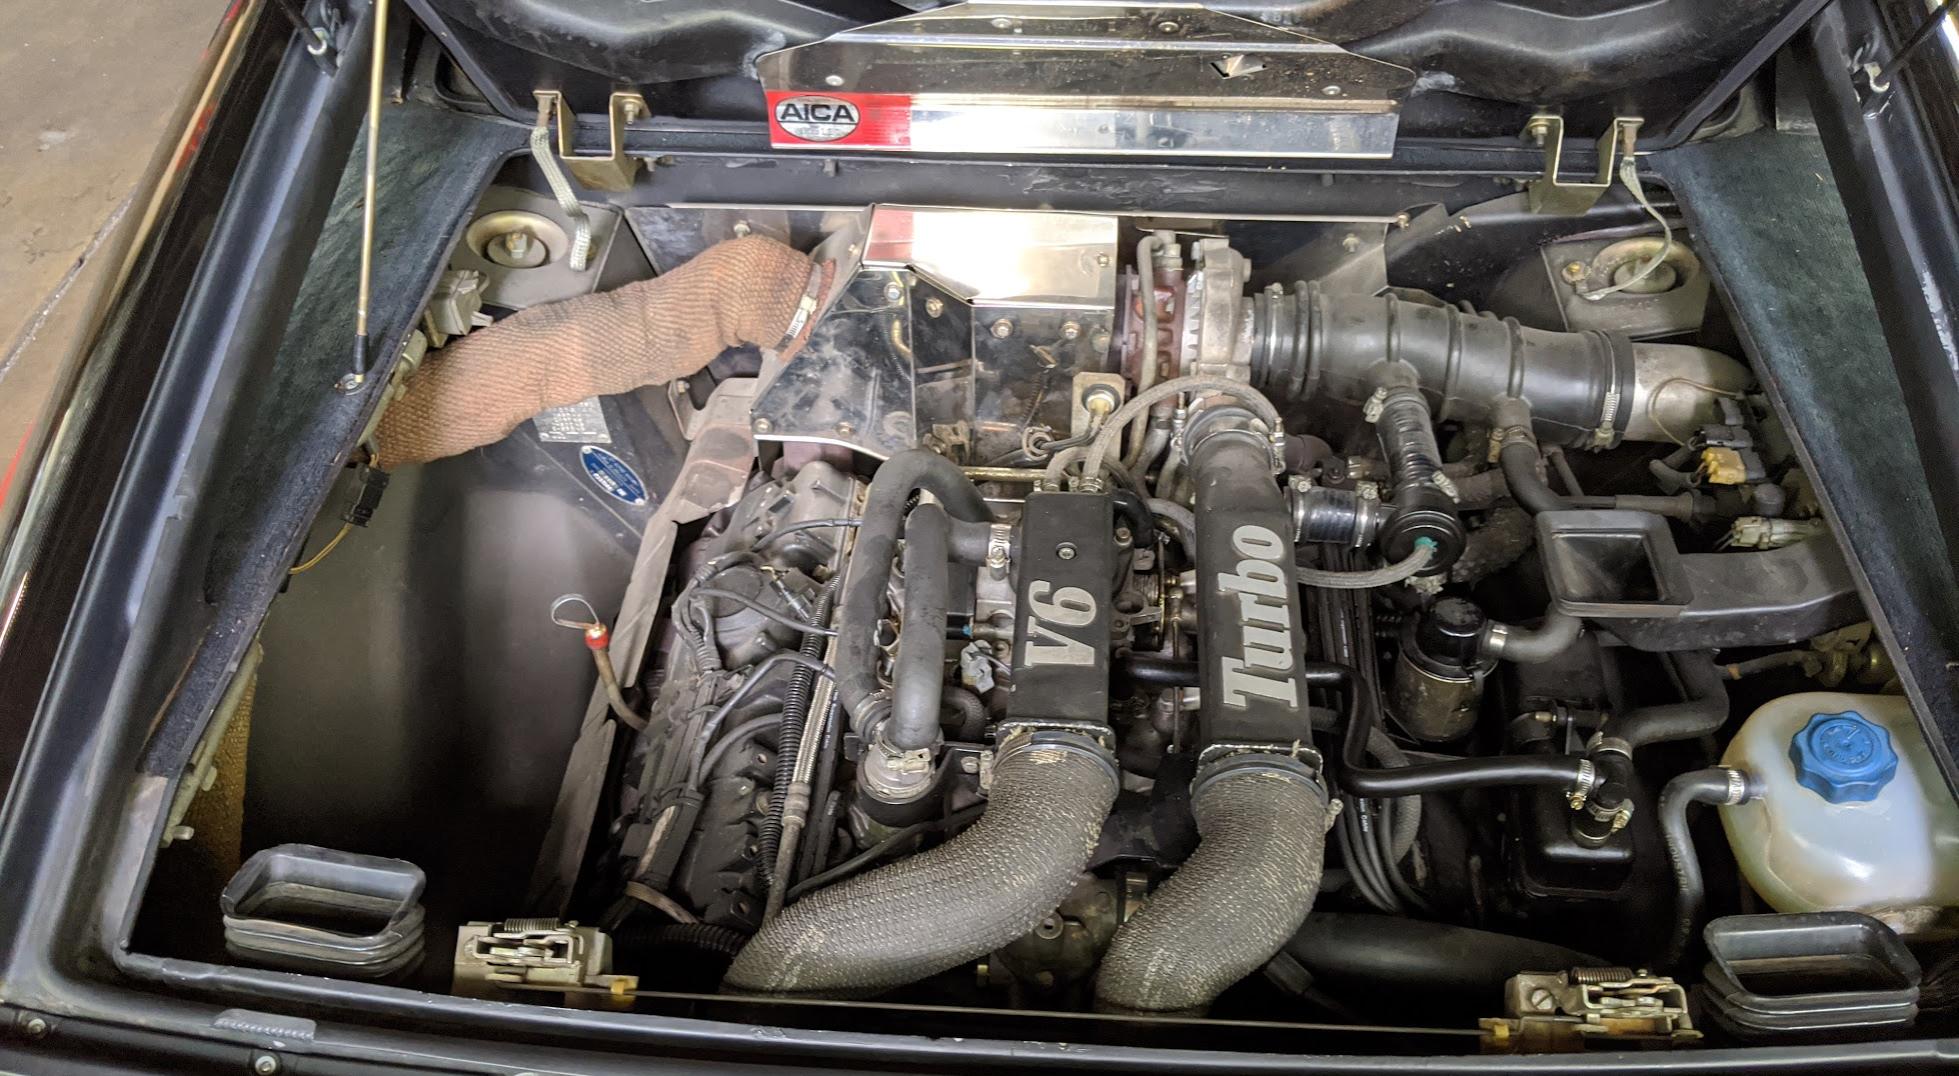 The engine of the GTA Turbo